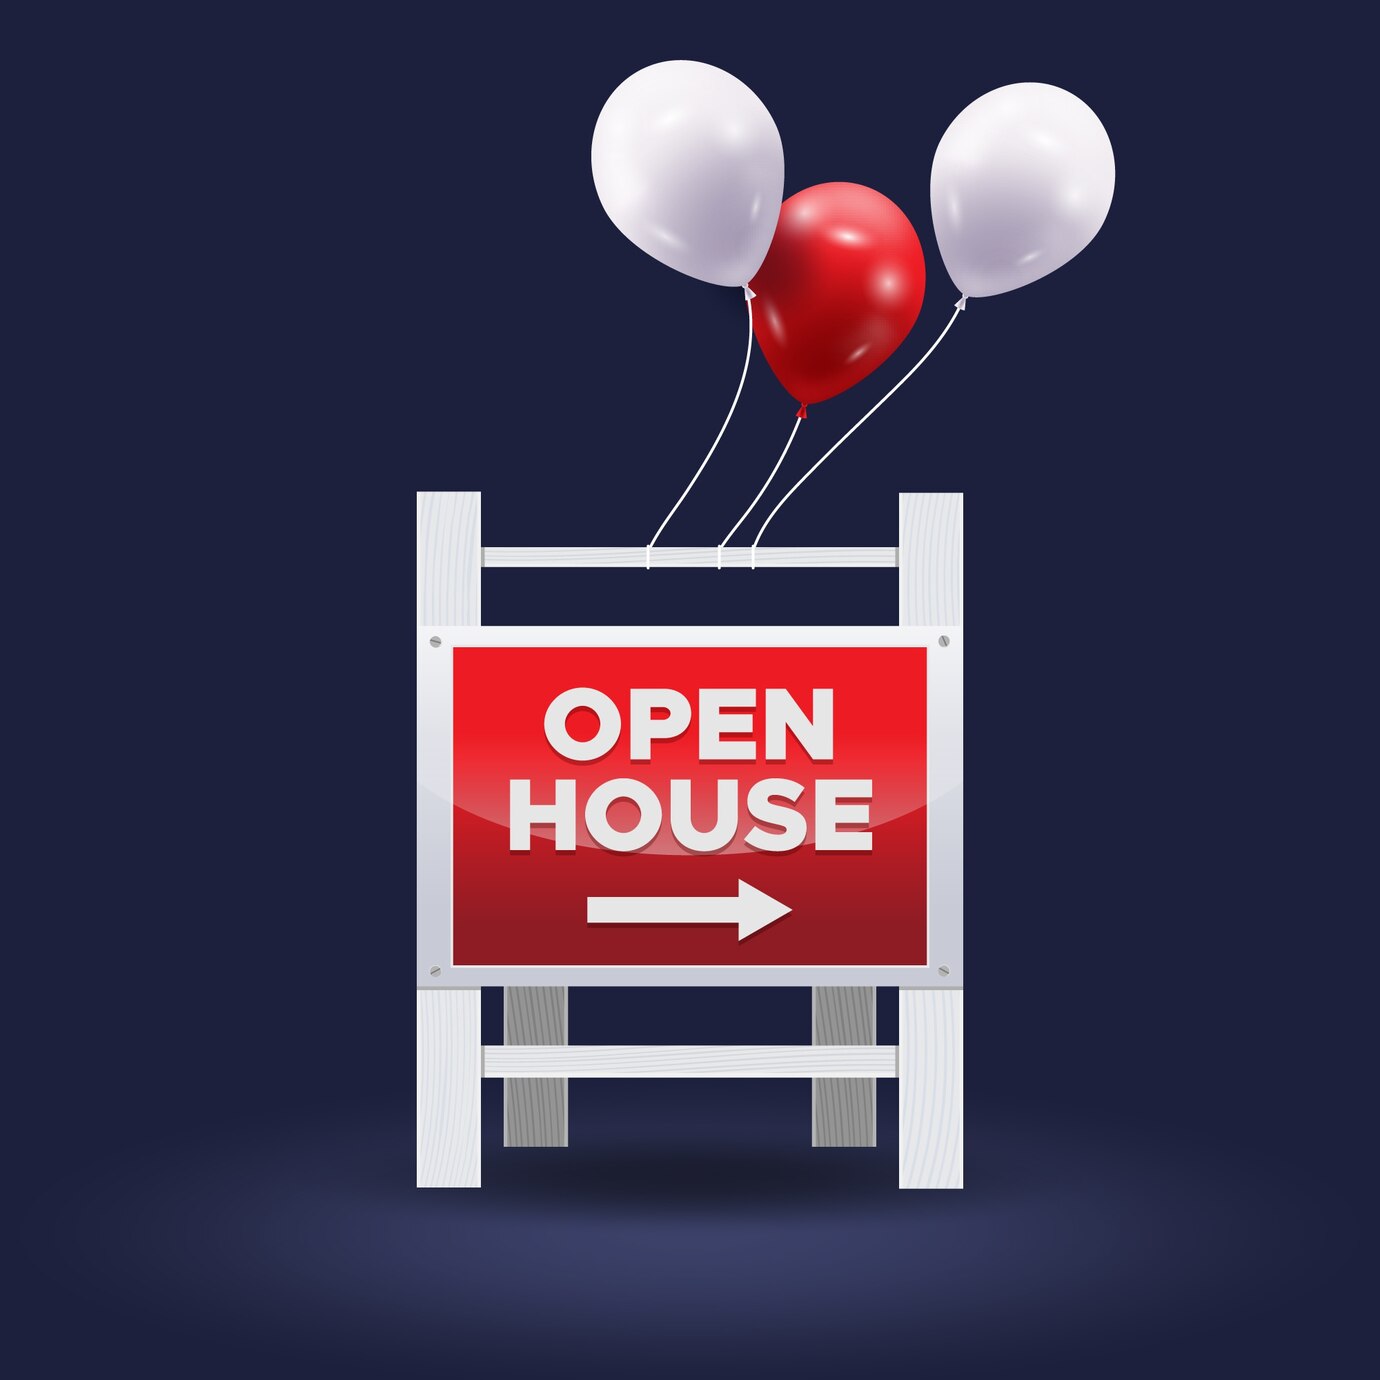 4 How to set up an Open House?